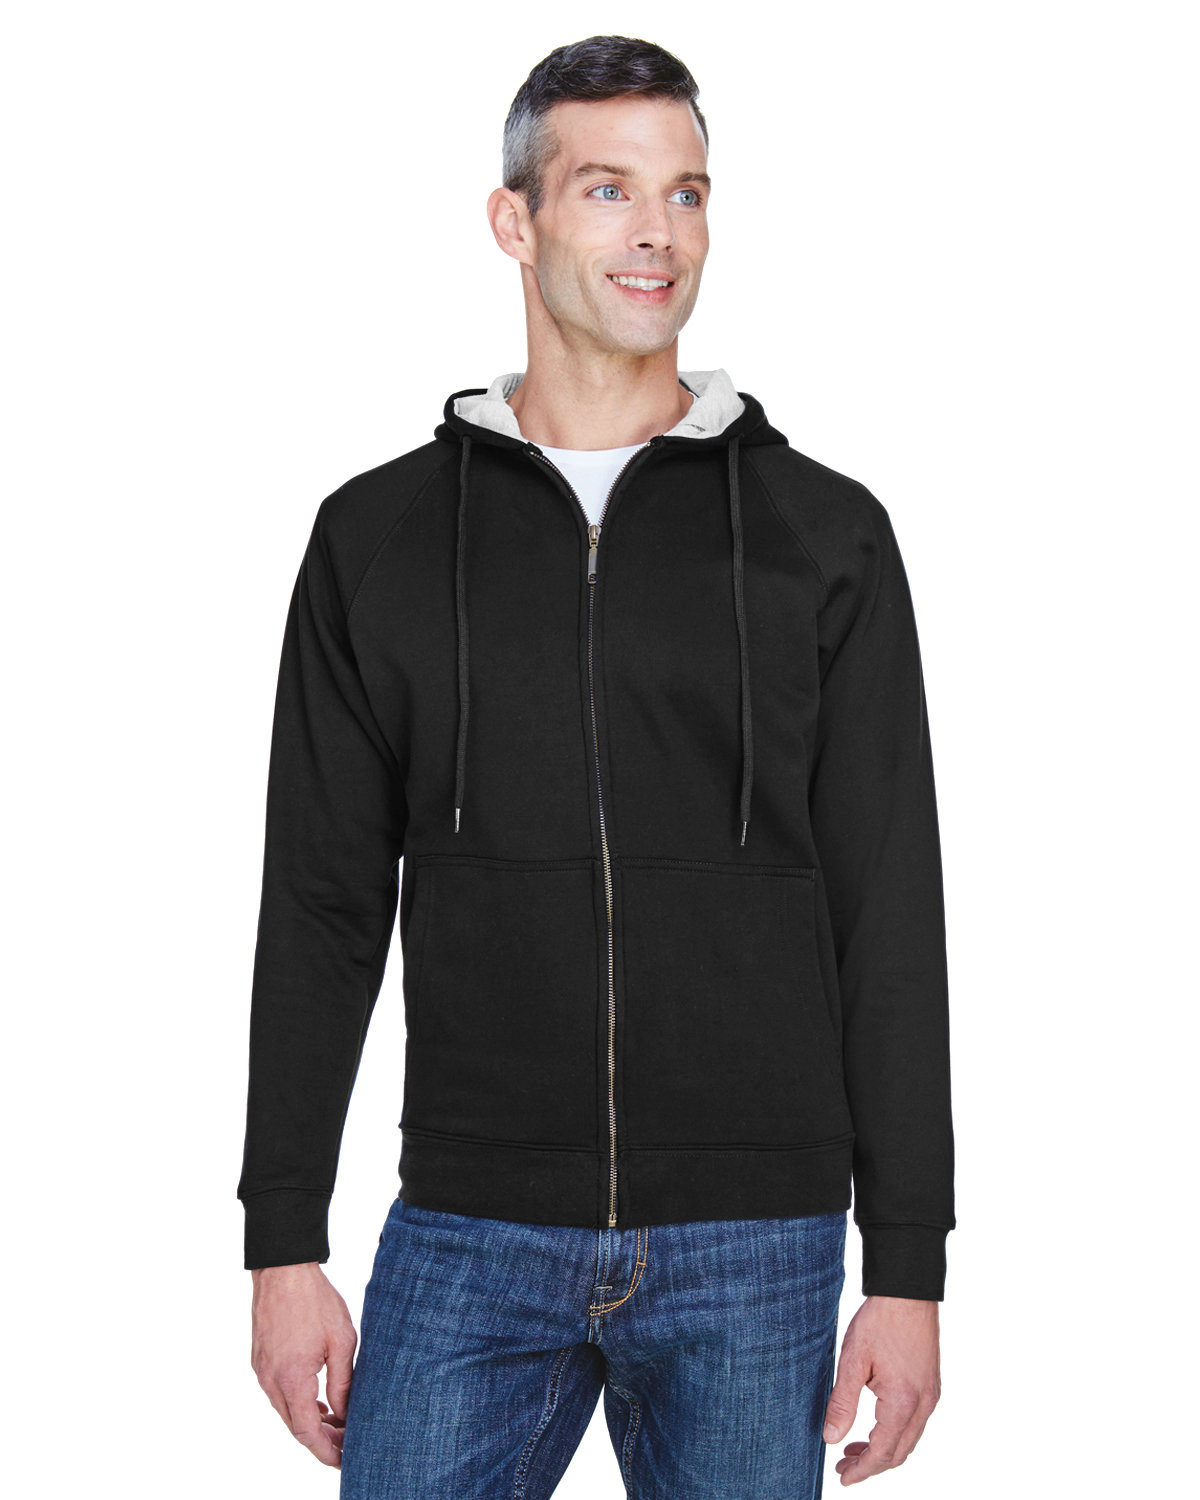 UltraClub 8463-Adult Thermal-Lined Jacket